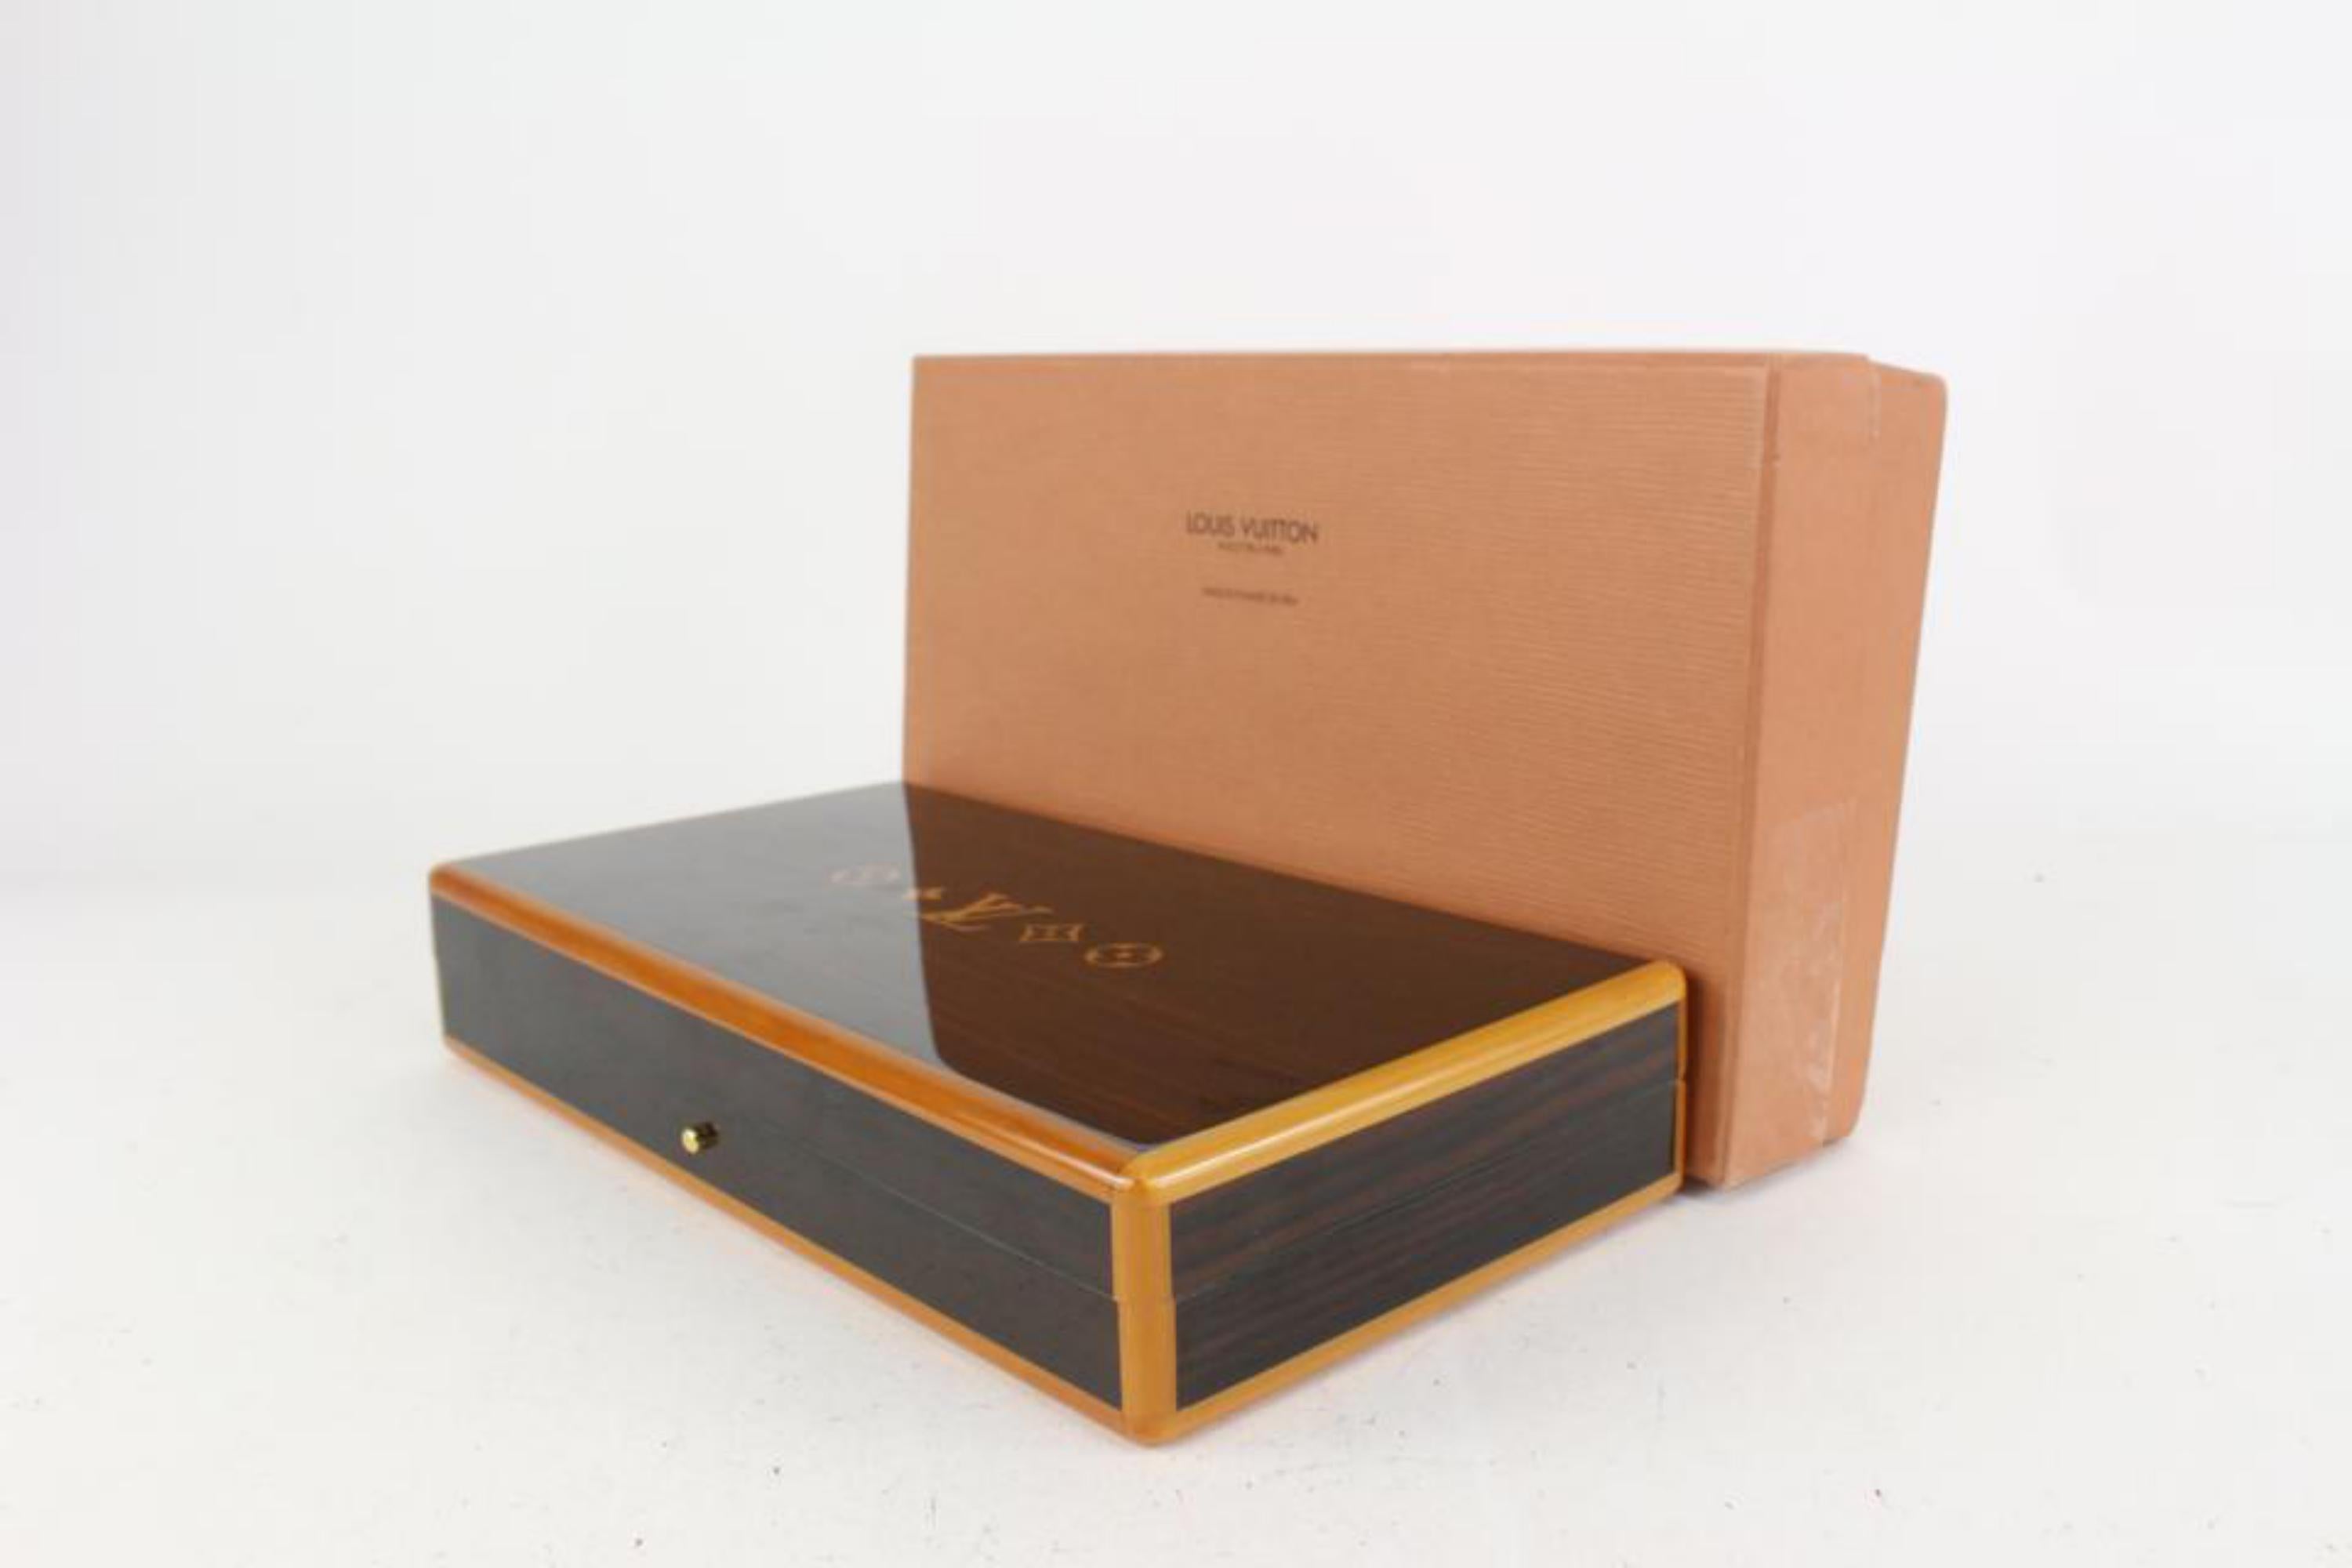 Louis Vuitton Cigar - For Sale on 1stDibs